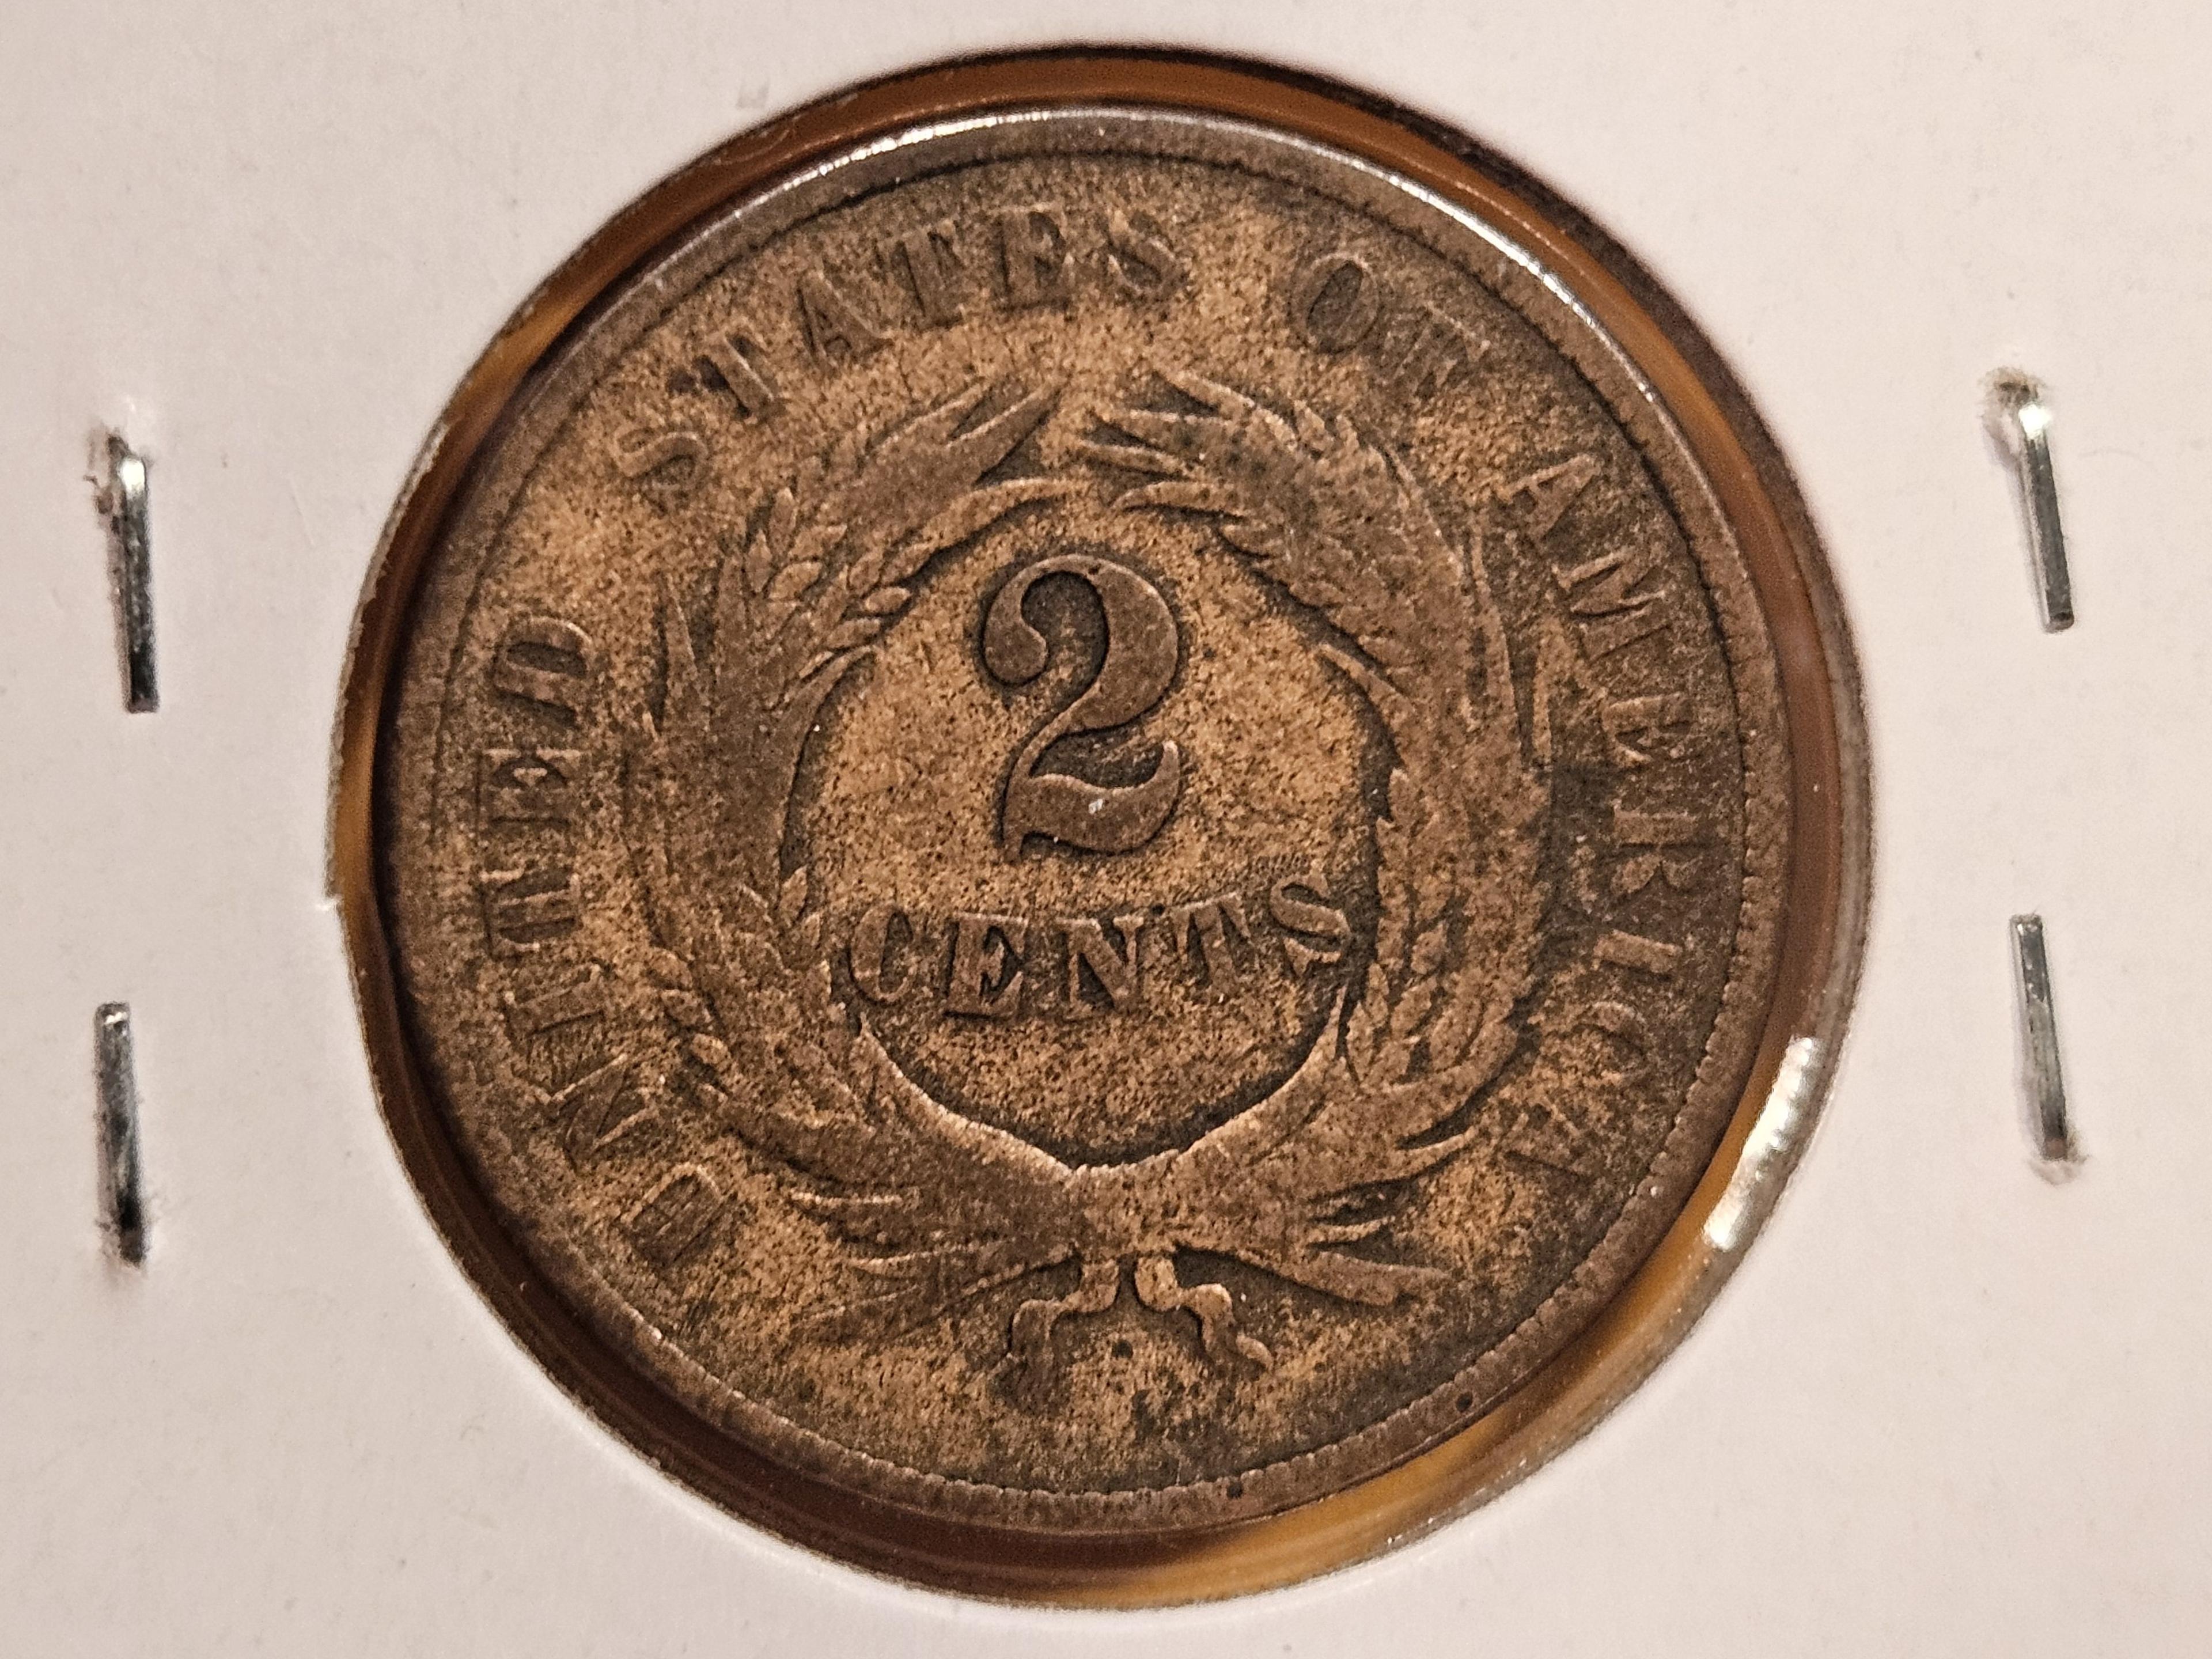 Three more 2 Cent pieces